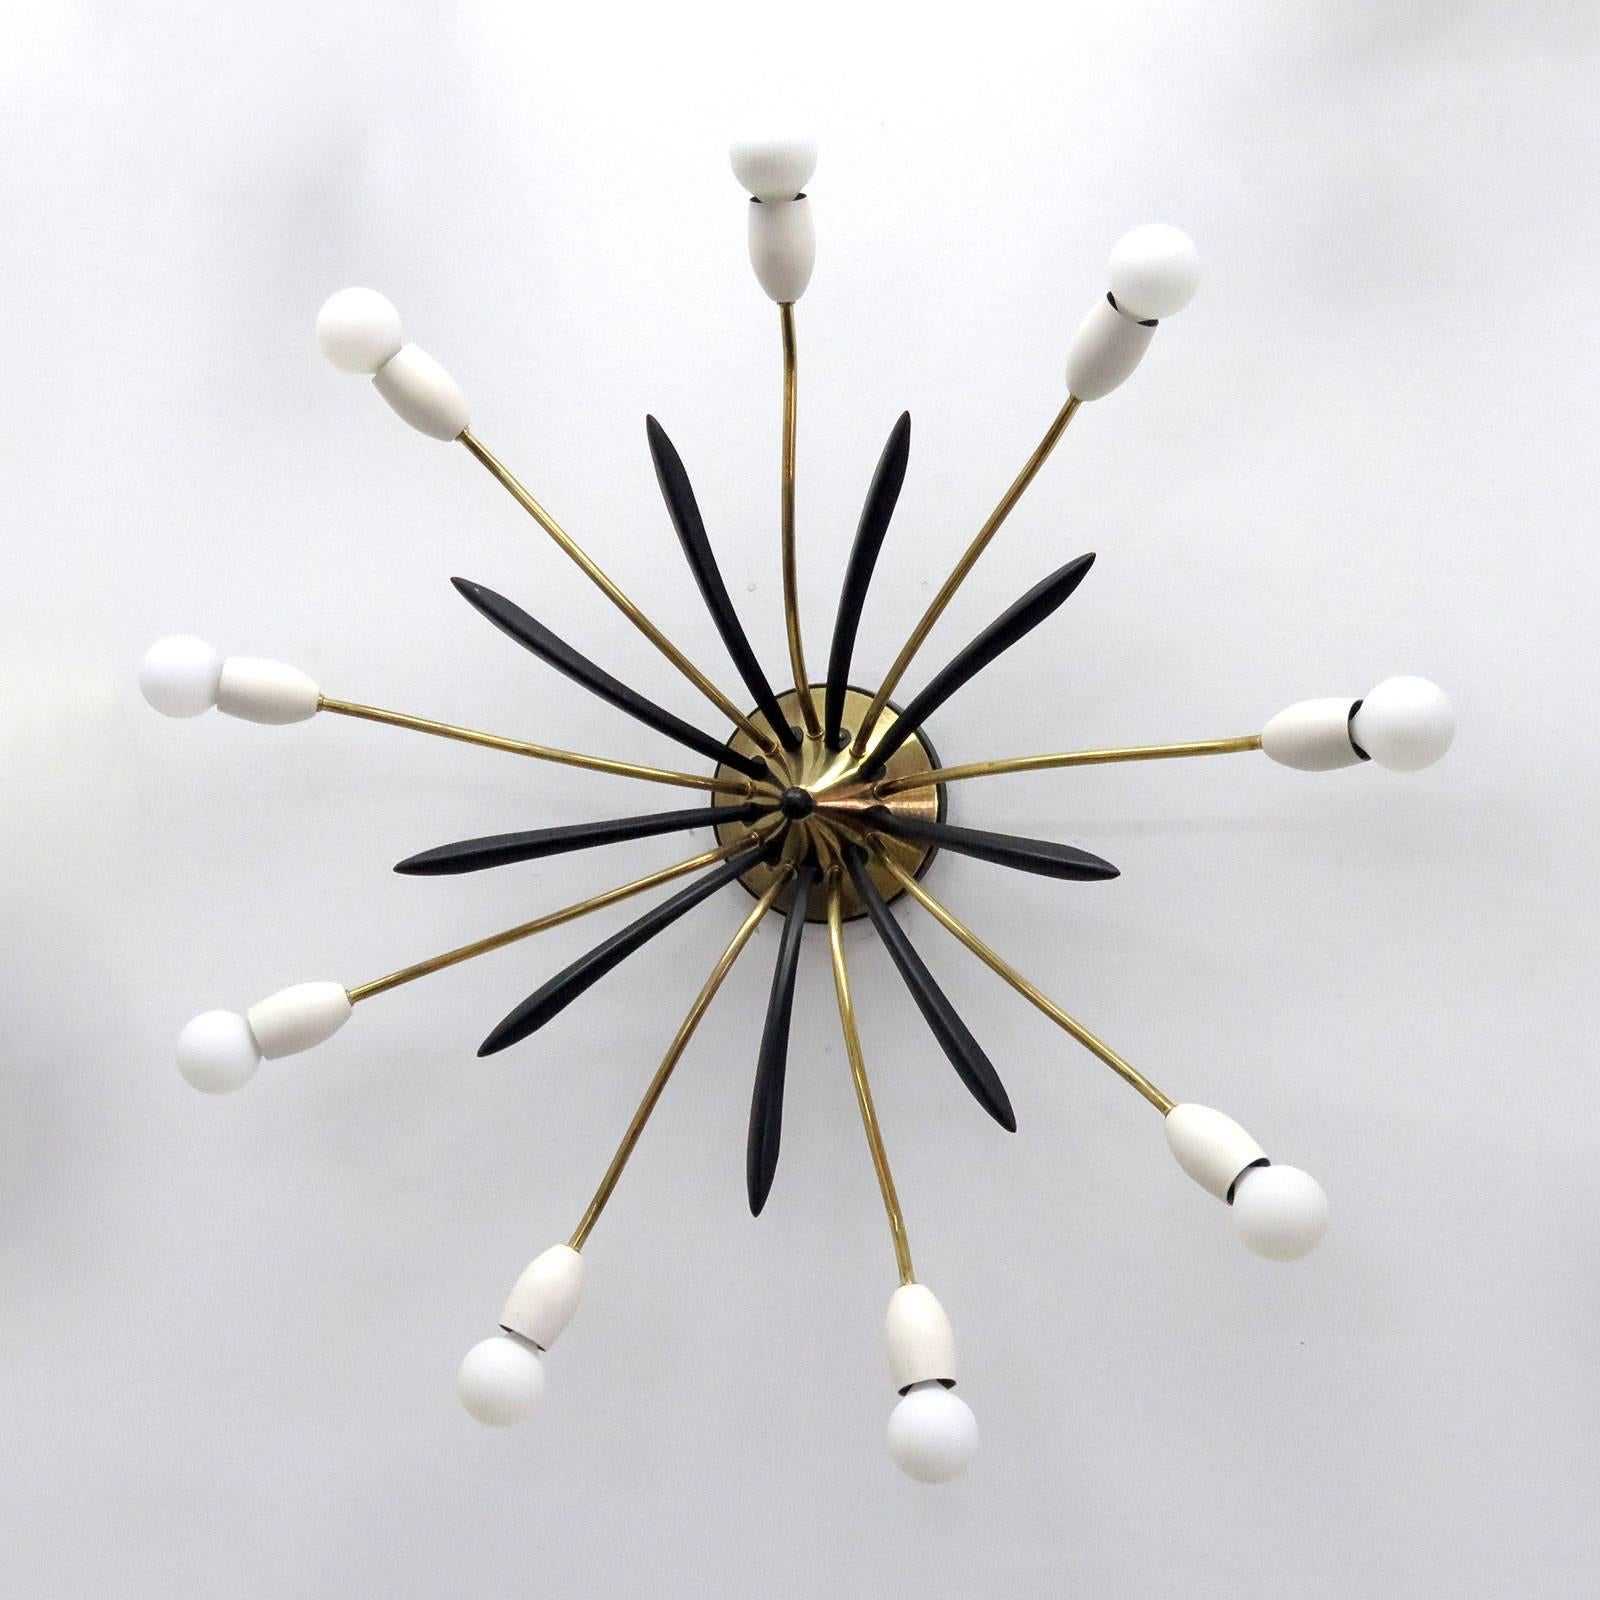 Wonderful large-scale German nine-arm Sputnik in brass and enameled metal, can be used as wall or ceiling flush mount fixture.